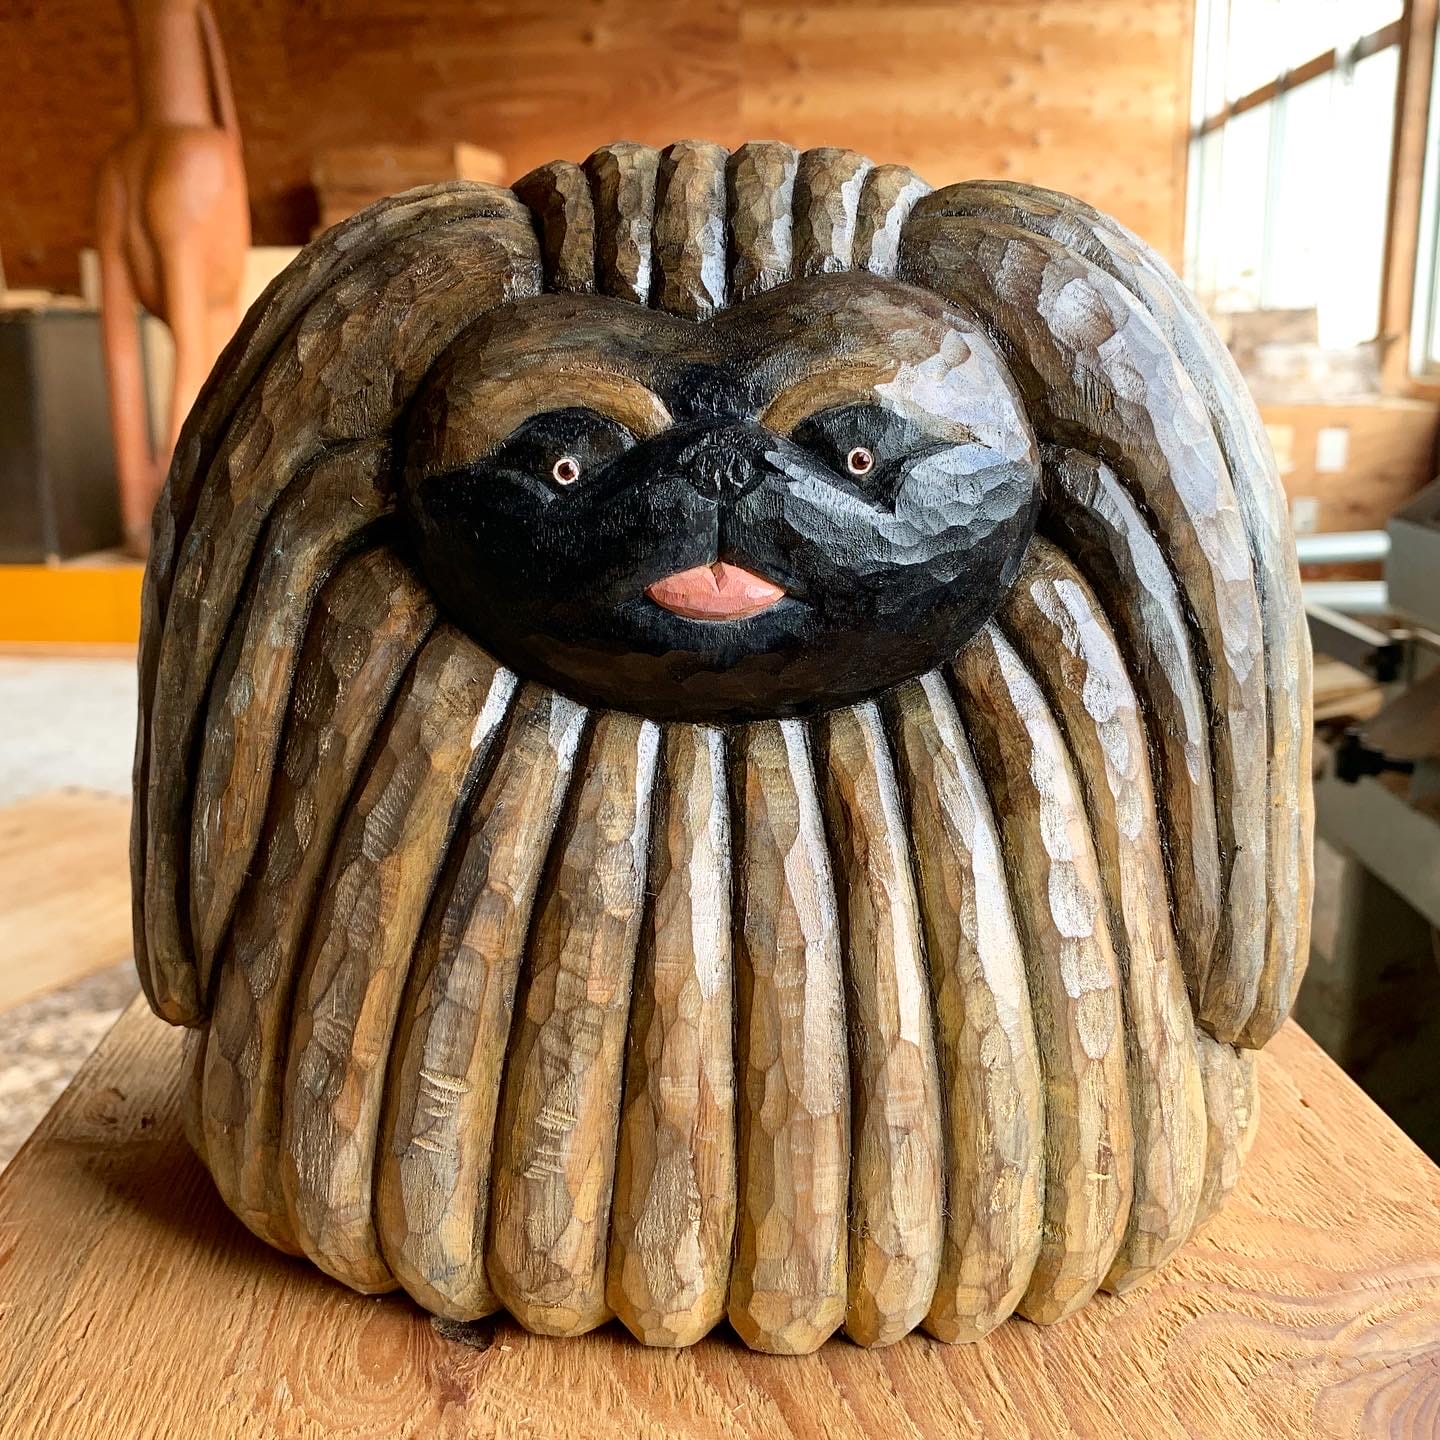 a carved wooden sculpture of a Shih Tzu in a woodworking studio